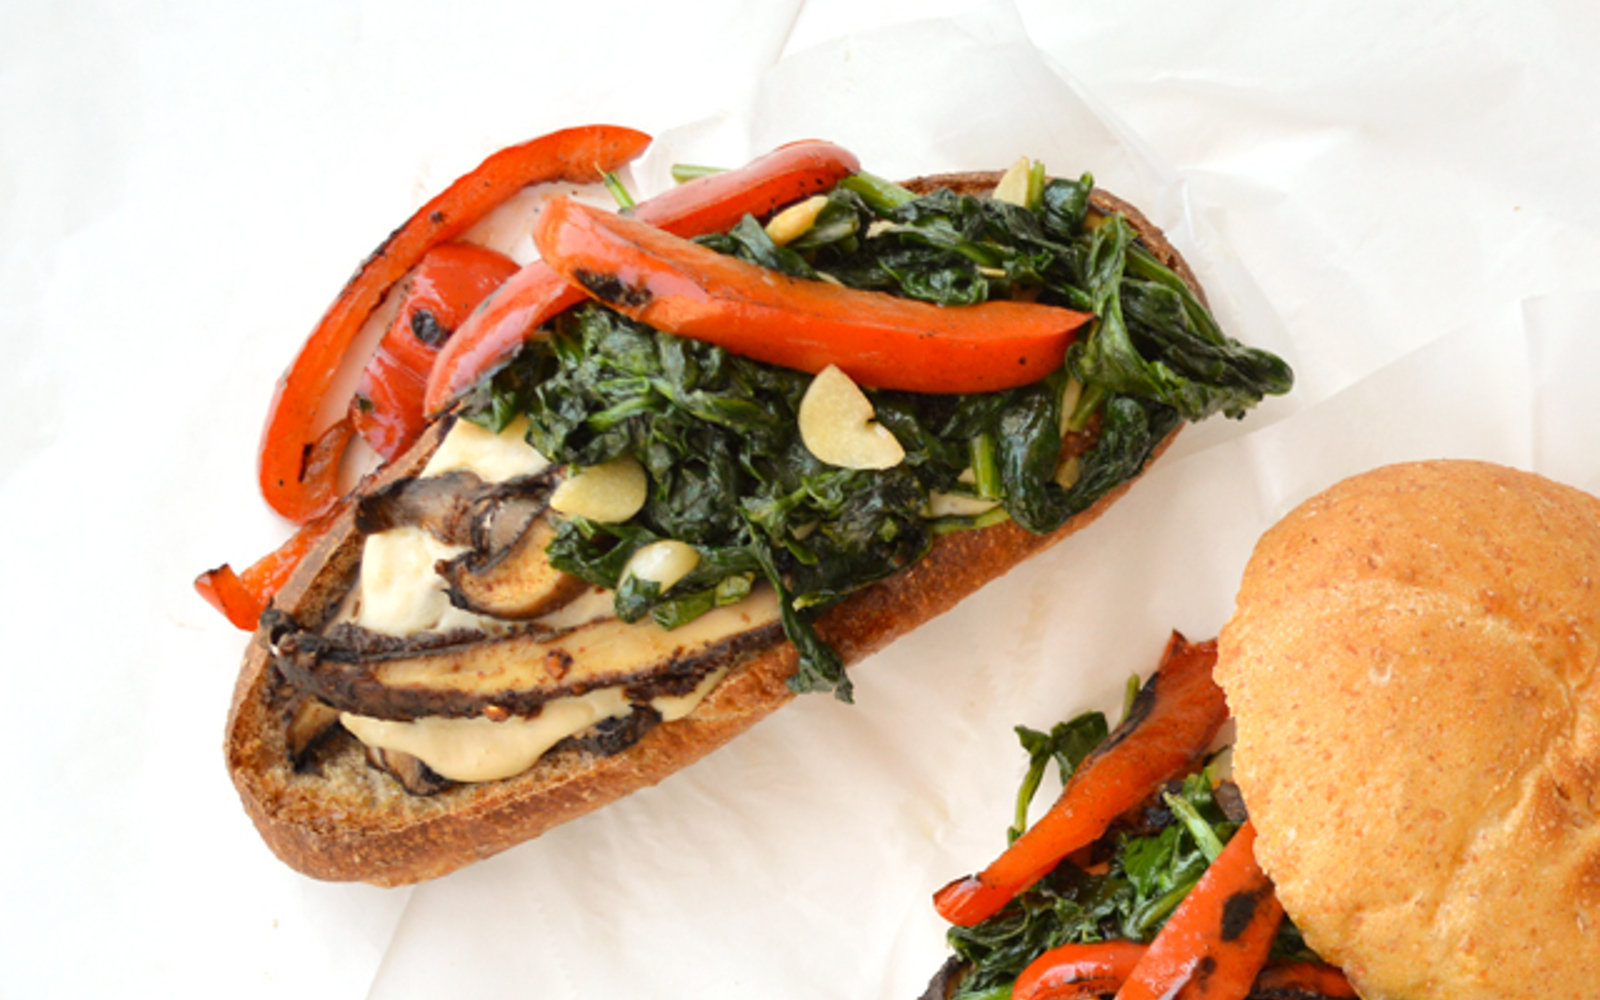 Classic Philly Roast Sandwich With 'Provolone' and Rapini